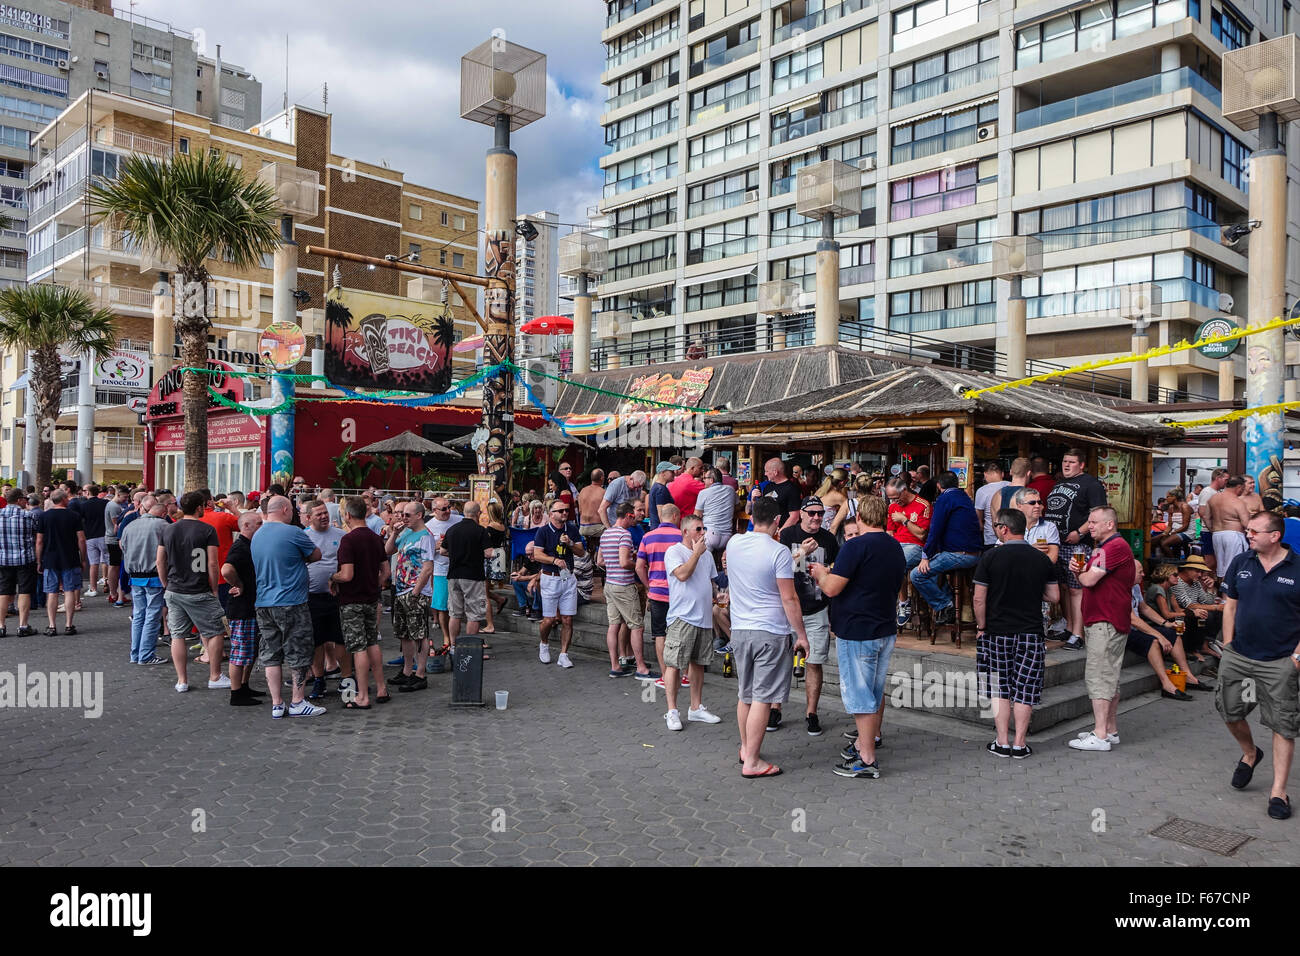 Benidorm, Spain. 13th November, 2015. England supporters begin to fill the bars in the resort of Benidorm, north of Alicante. The Spain versus England friendly match is due to kick off tonight, Friday in Alicante. Crowds outside the beachfront Tiki bar Credit:  Mick Flynn/Alamy Live News Stock Photo